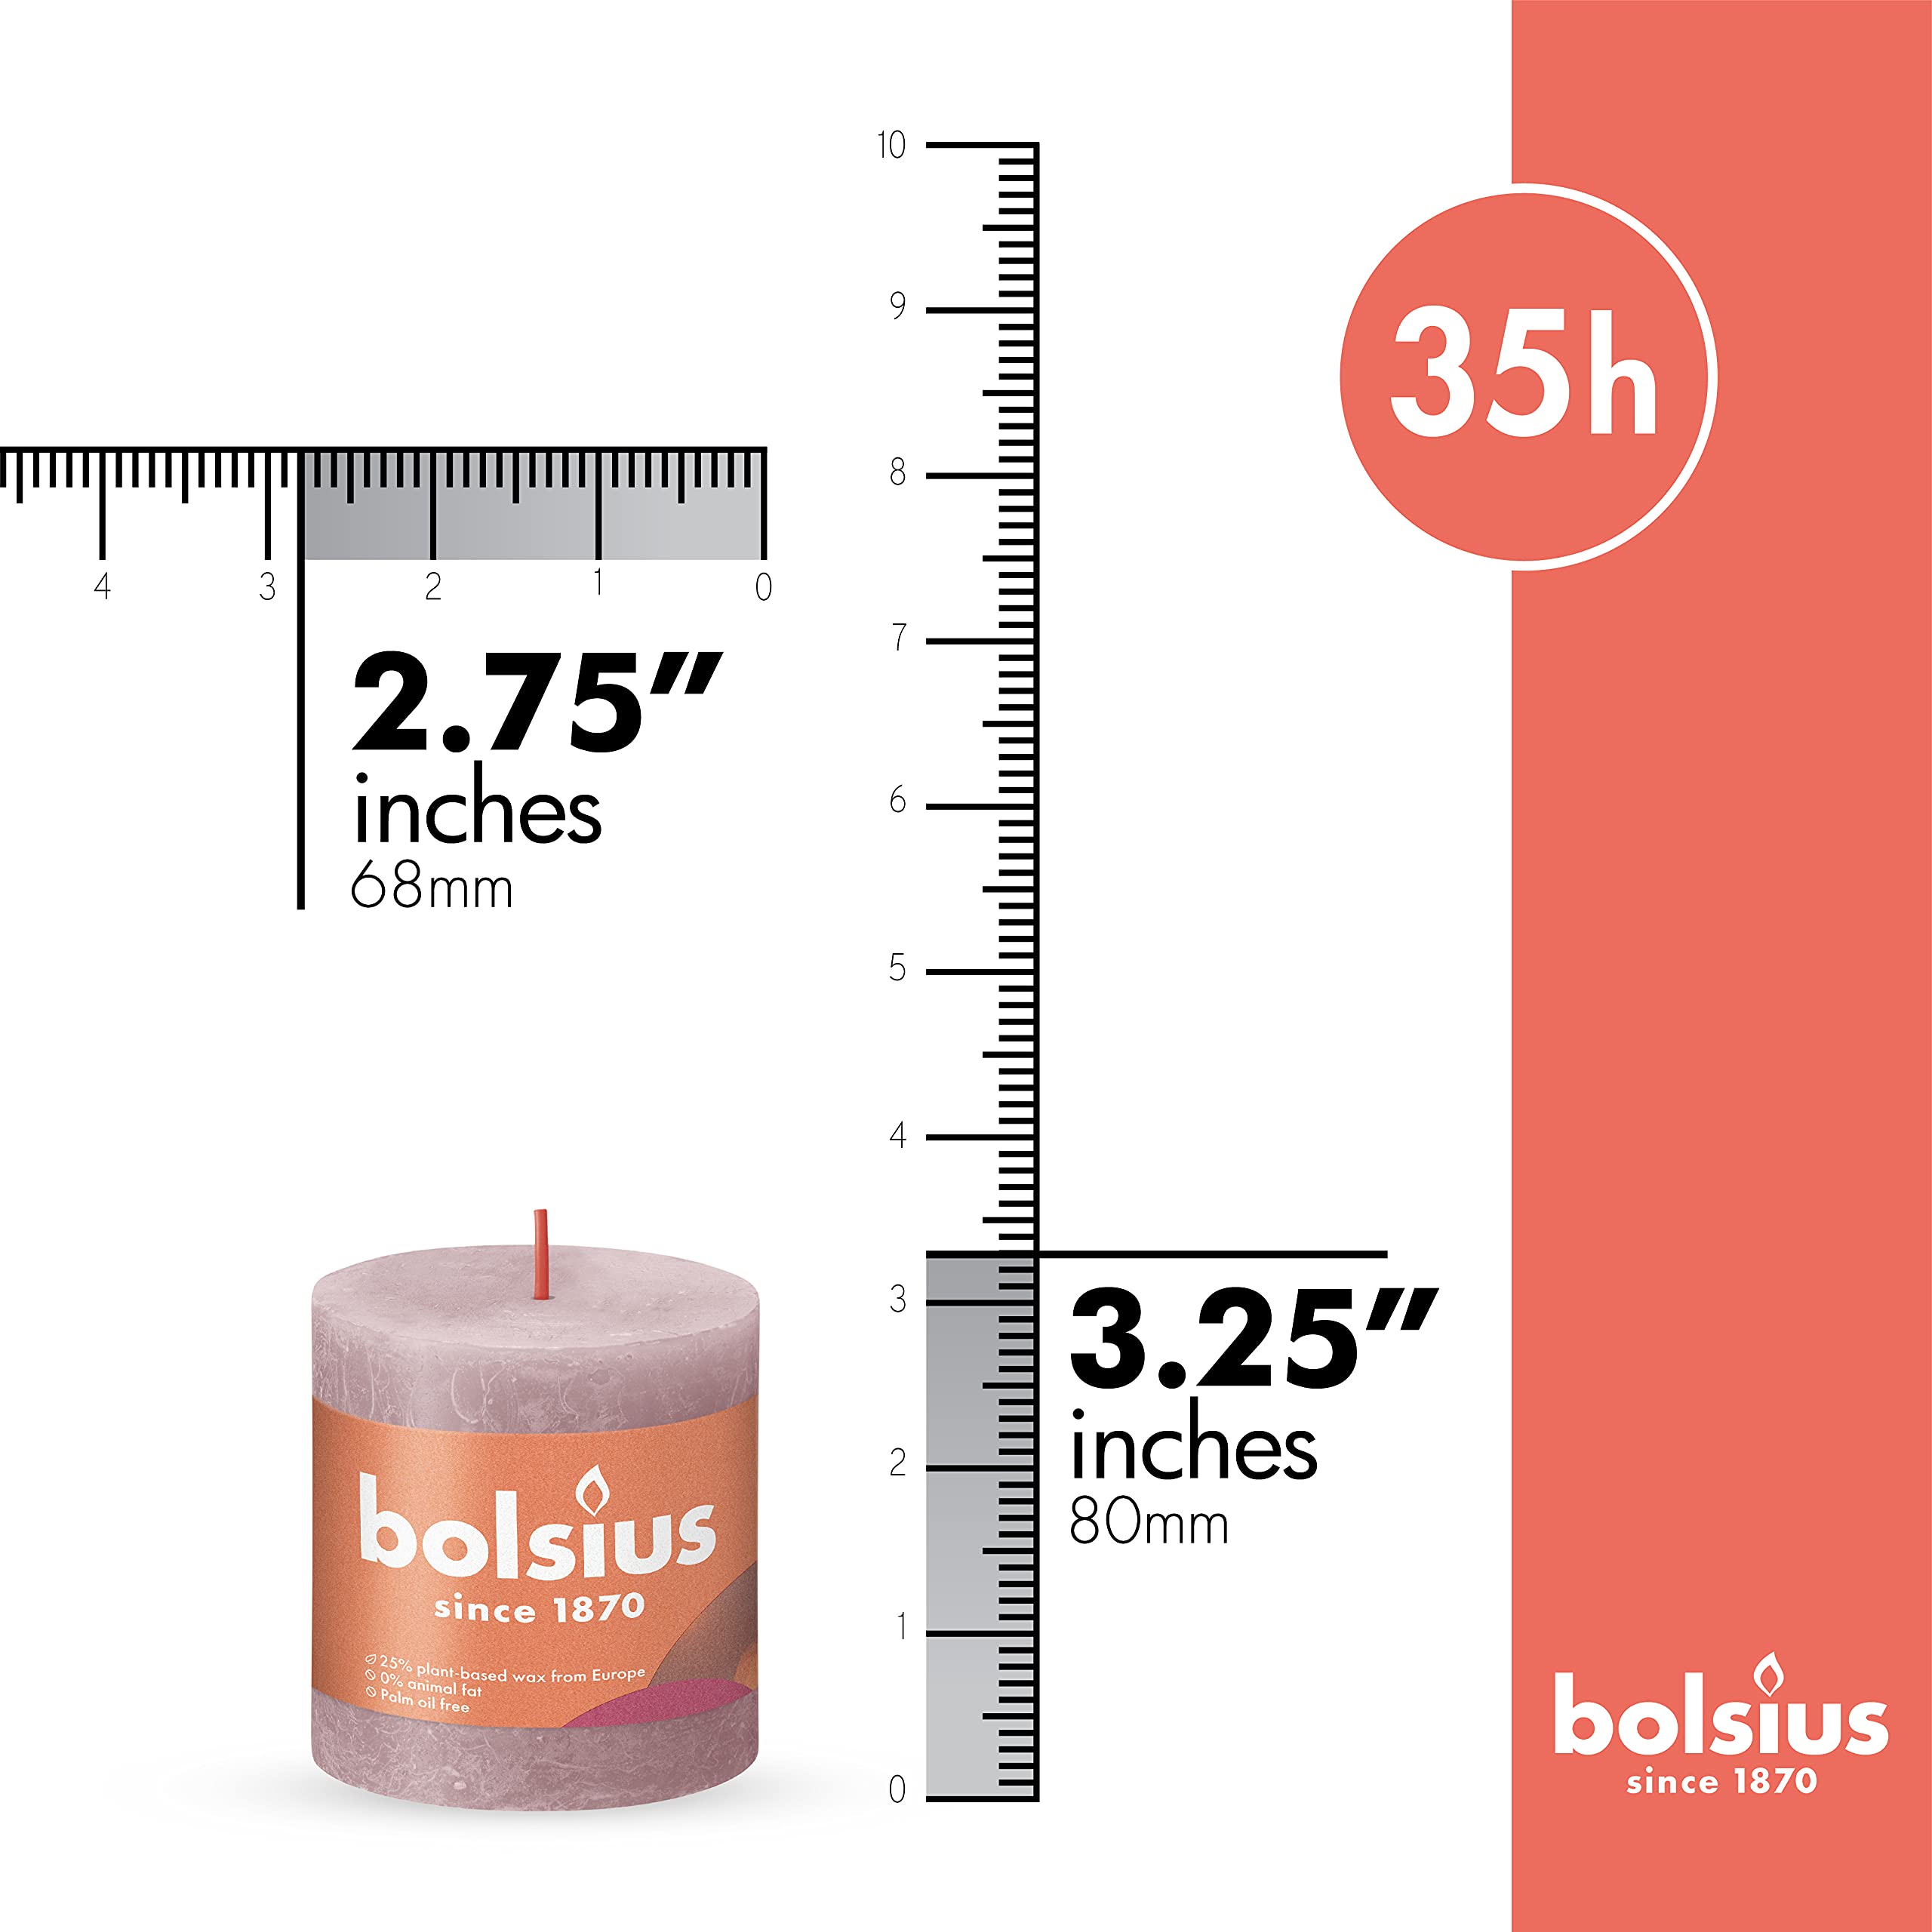 BOLSIUS Pillar Candles - Premium European Quality - Natural Eco-Friendly Plant-Based Wax - Unscented Dripless Smokeless 35 Hour Party and Wedding Candles  - Acceptable